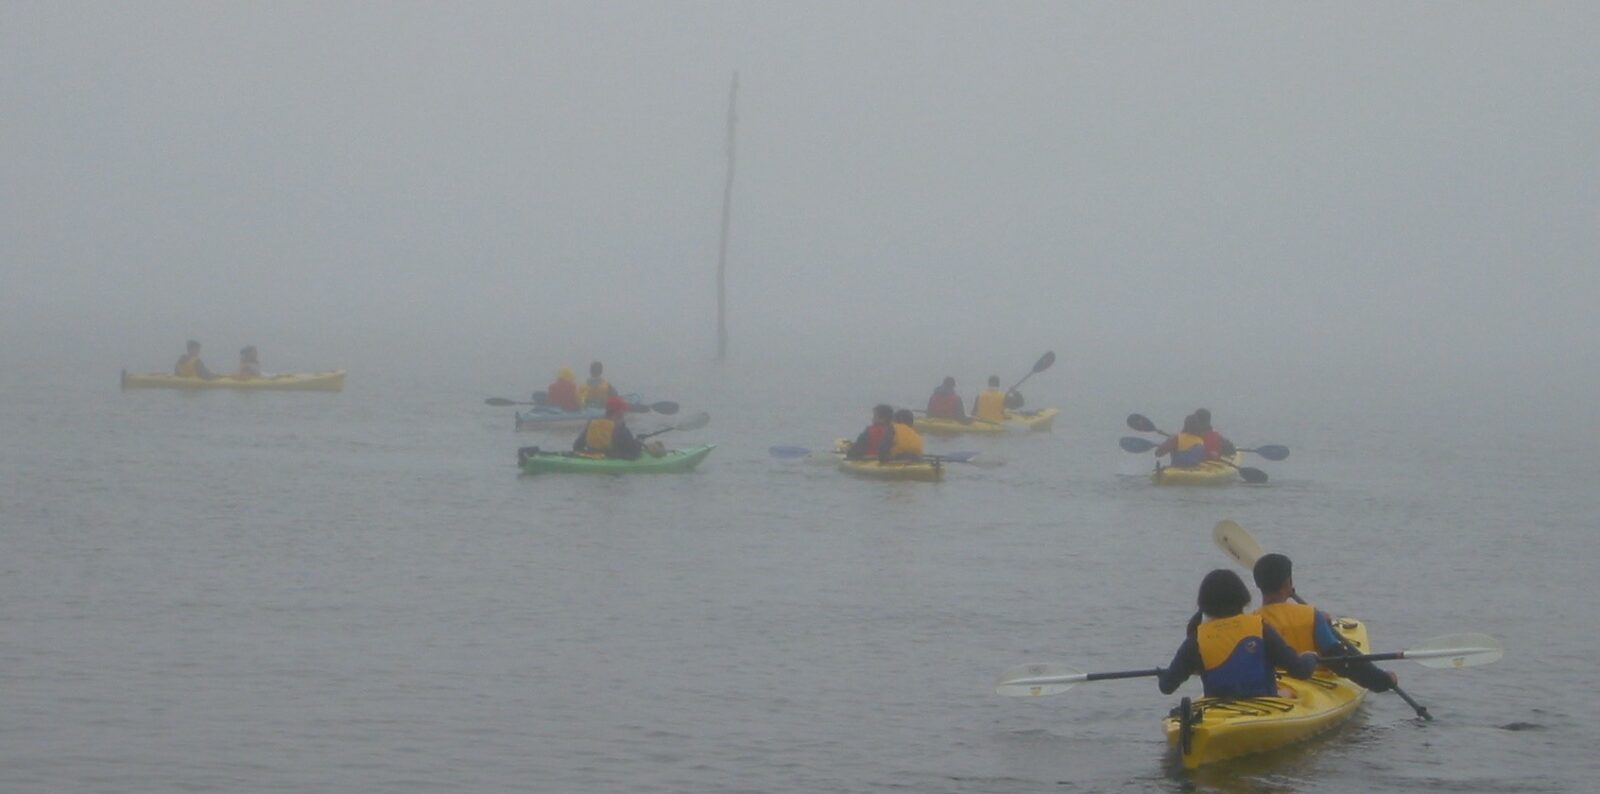 A group of people kayaking on the water in a foggy day.